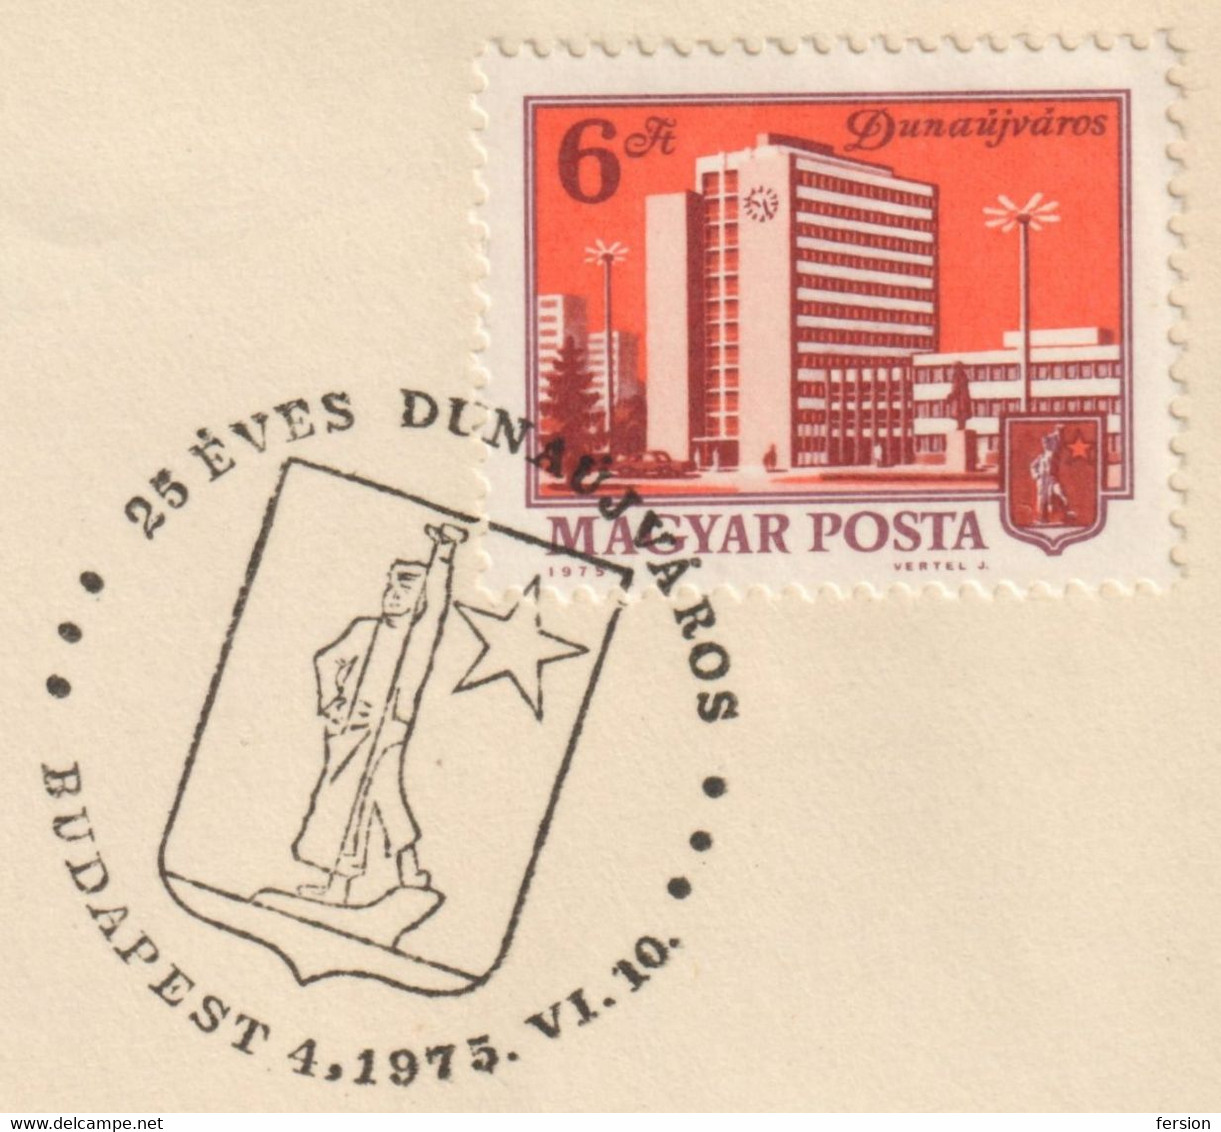 Coat Of Arms : Blacksmith Monument Industry Red Star / 25th Anniv. City DUNAÚJVÁROS Hungary 1975 FDC Cover - Covers & Documents